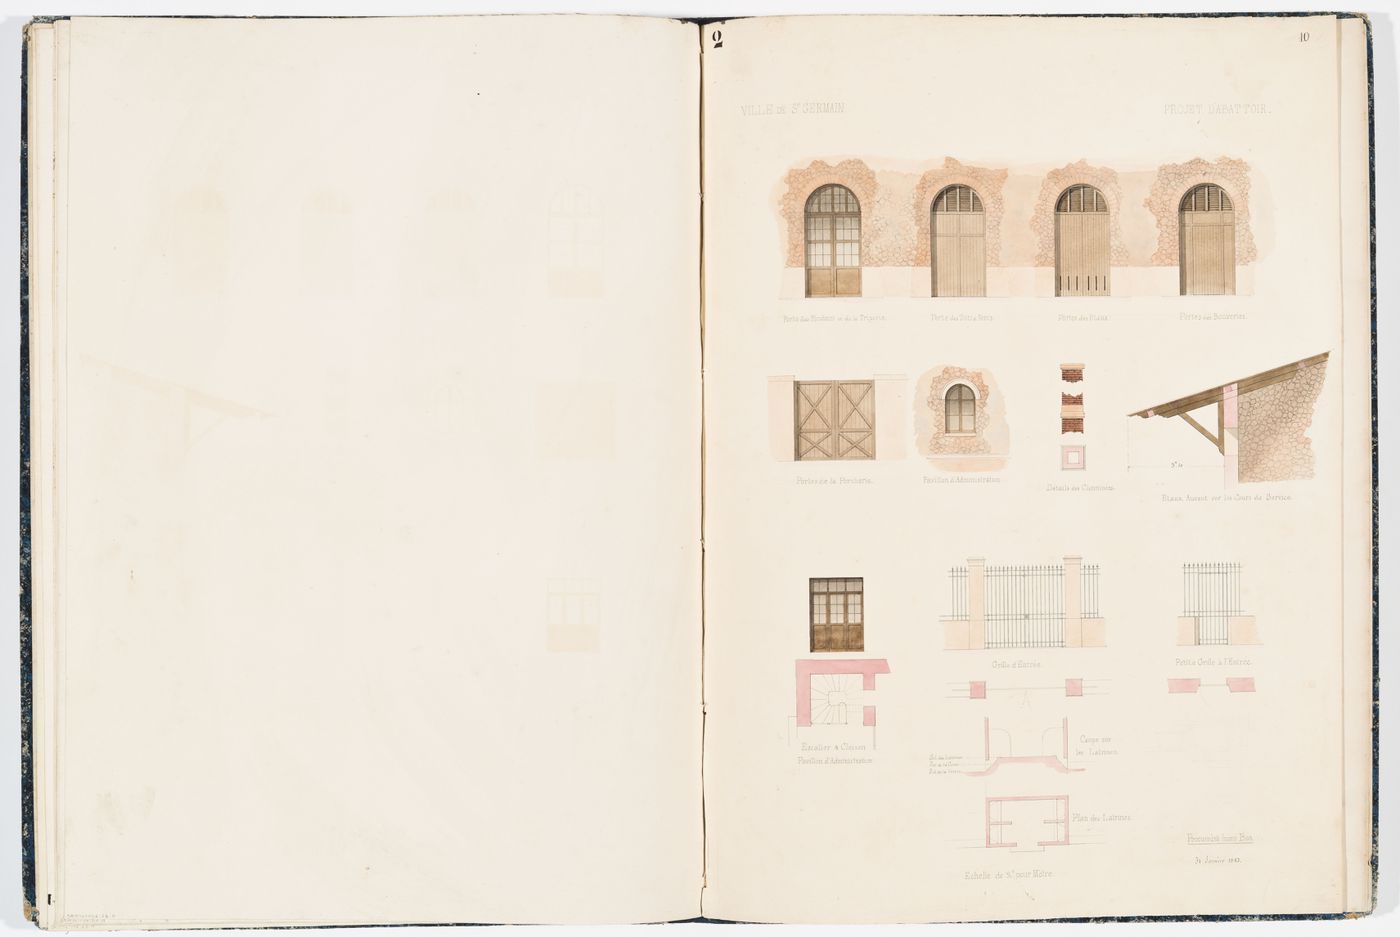 Detail drawings for doors, gates, a chimney, and a window, with plans for the gates and a stairwell, and a plan and section for the latrines of the municipal slaughterhouse